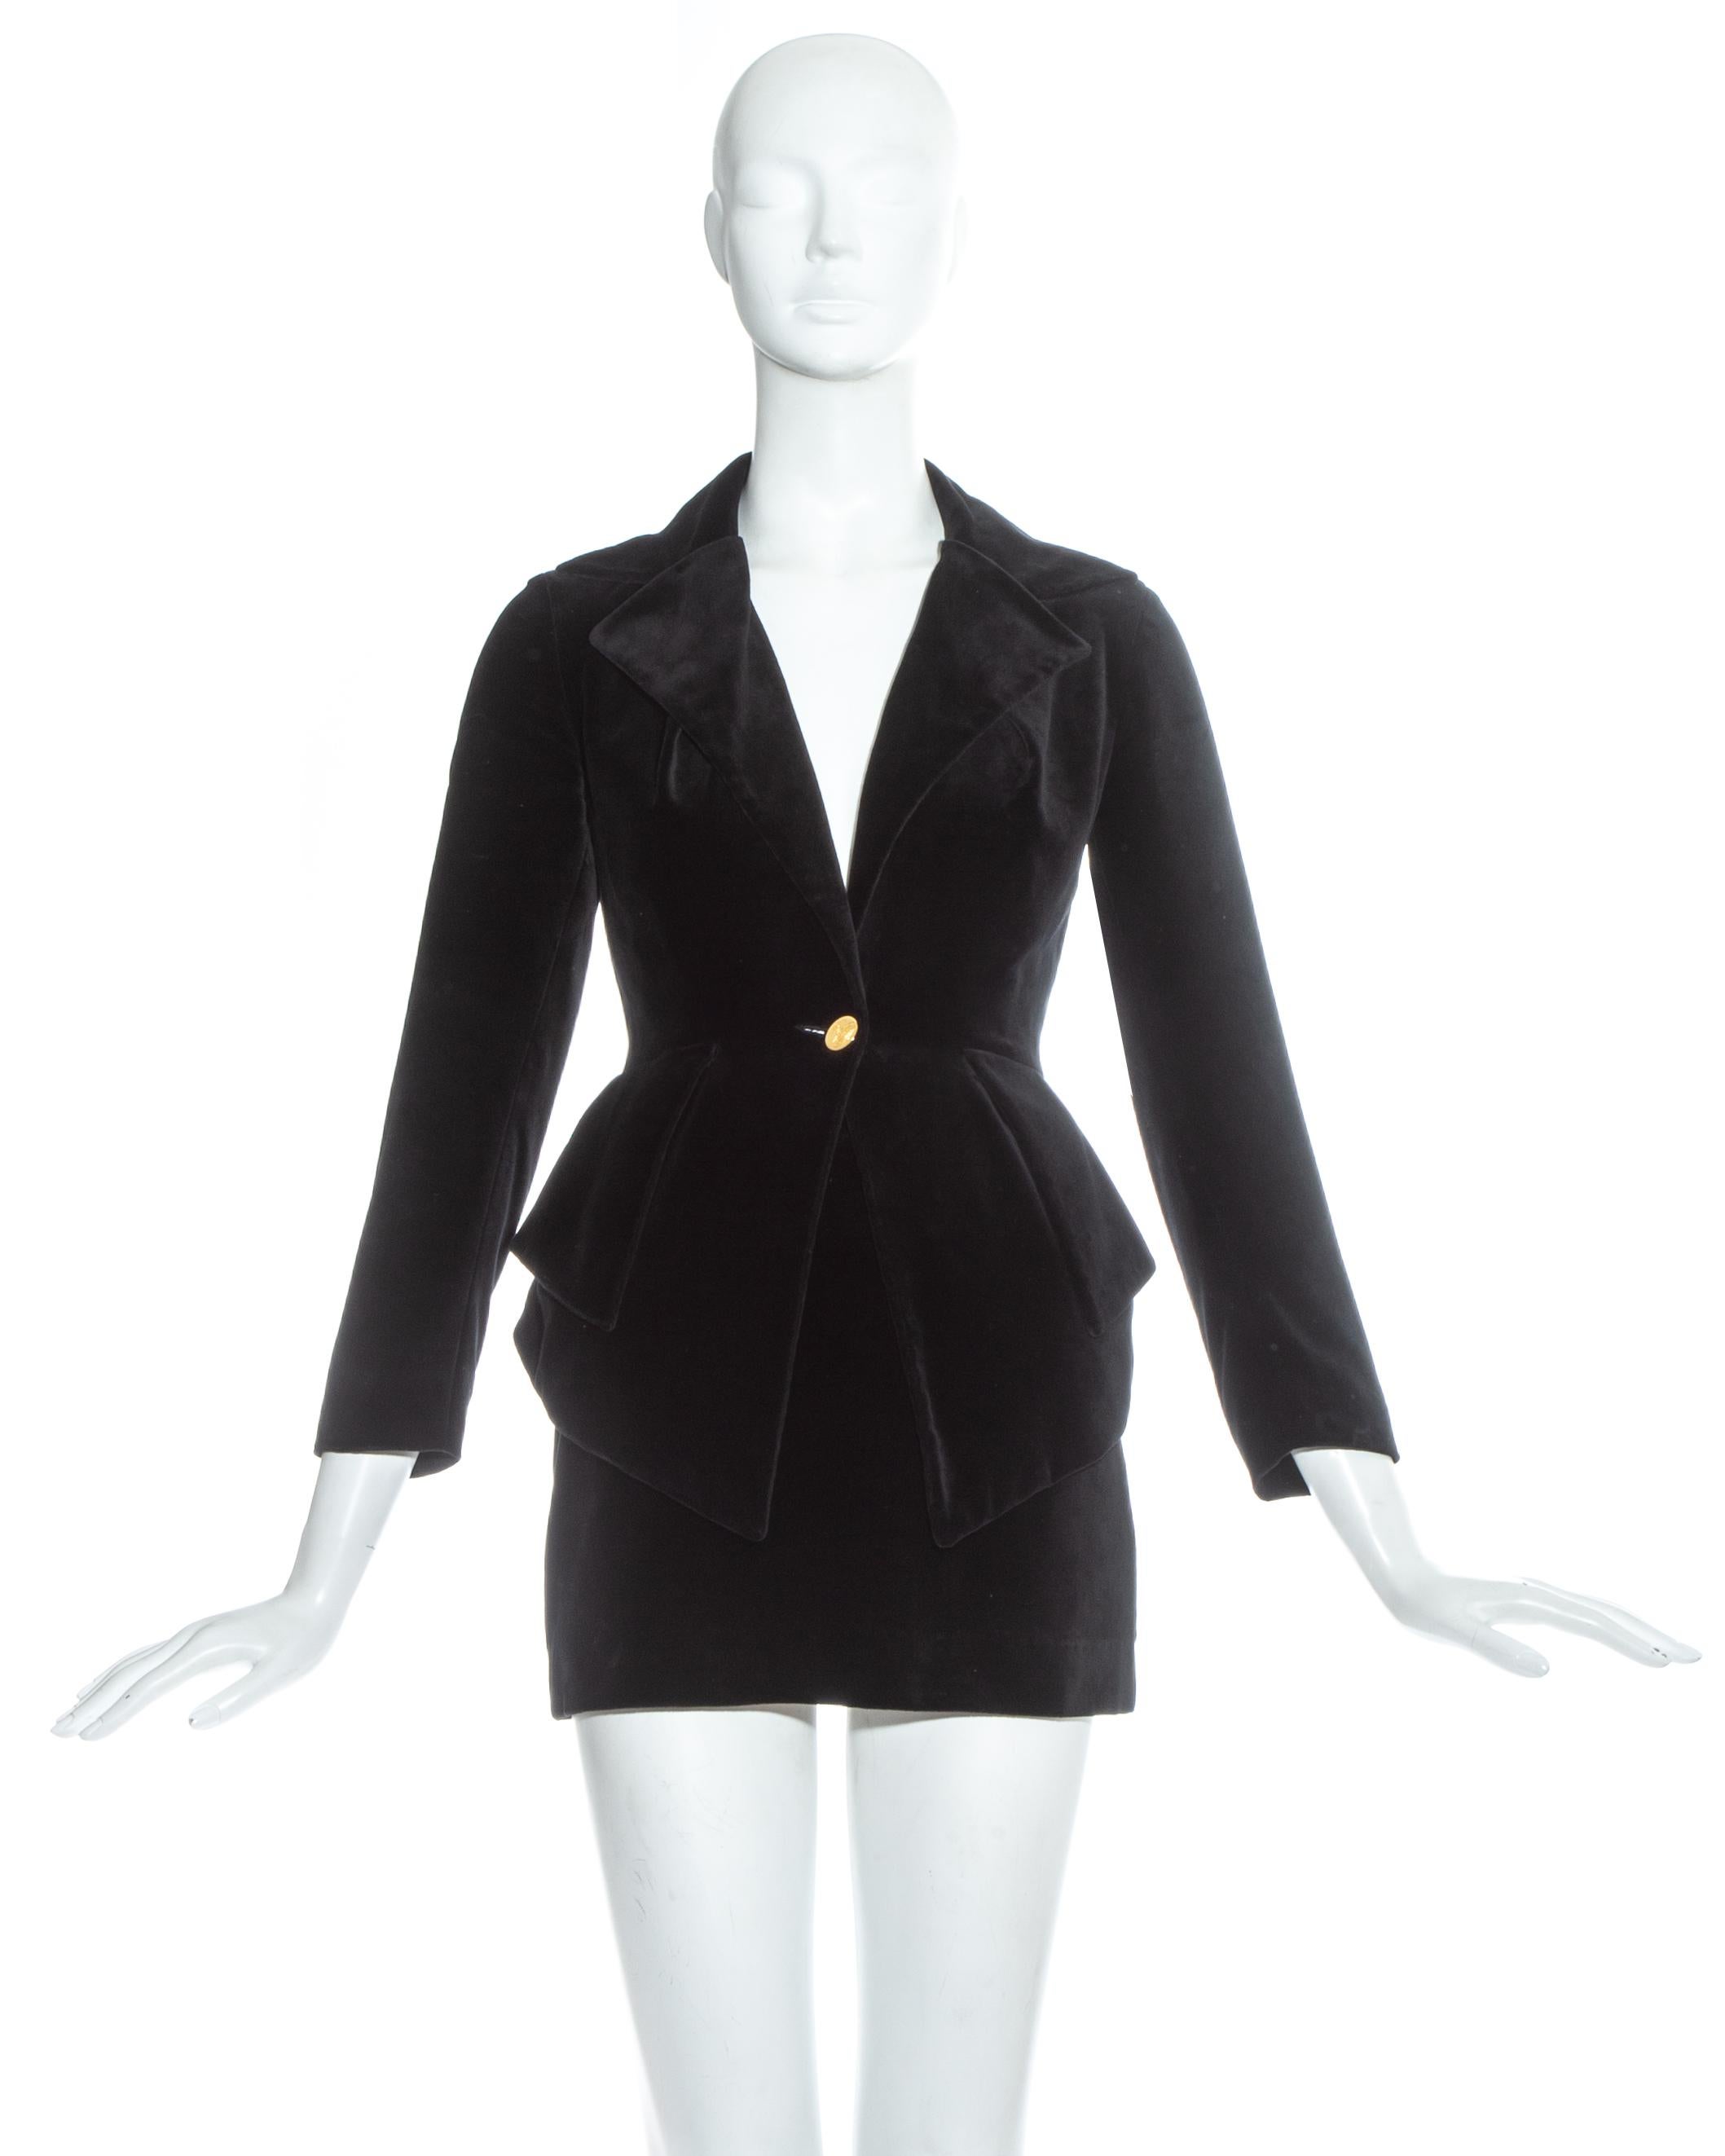 Vivienne Westwood black velvet skirt suit. Ultra mini pencil skirt paired with a tailored blazer jacket with peplum and pleated vent at the centre back.

Fall-Winter 1993